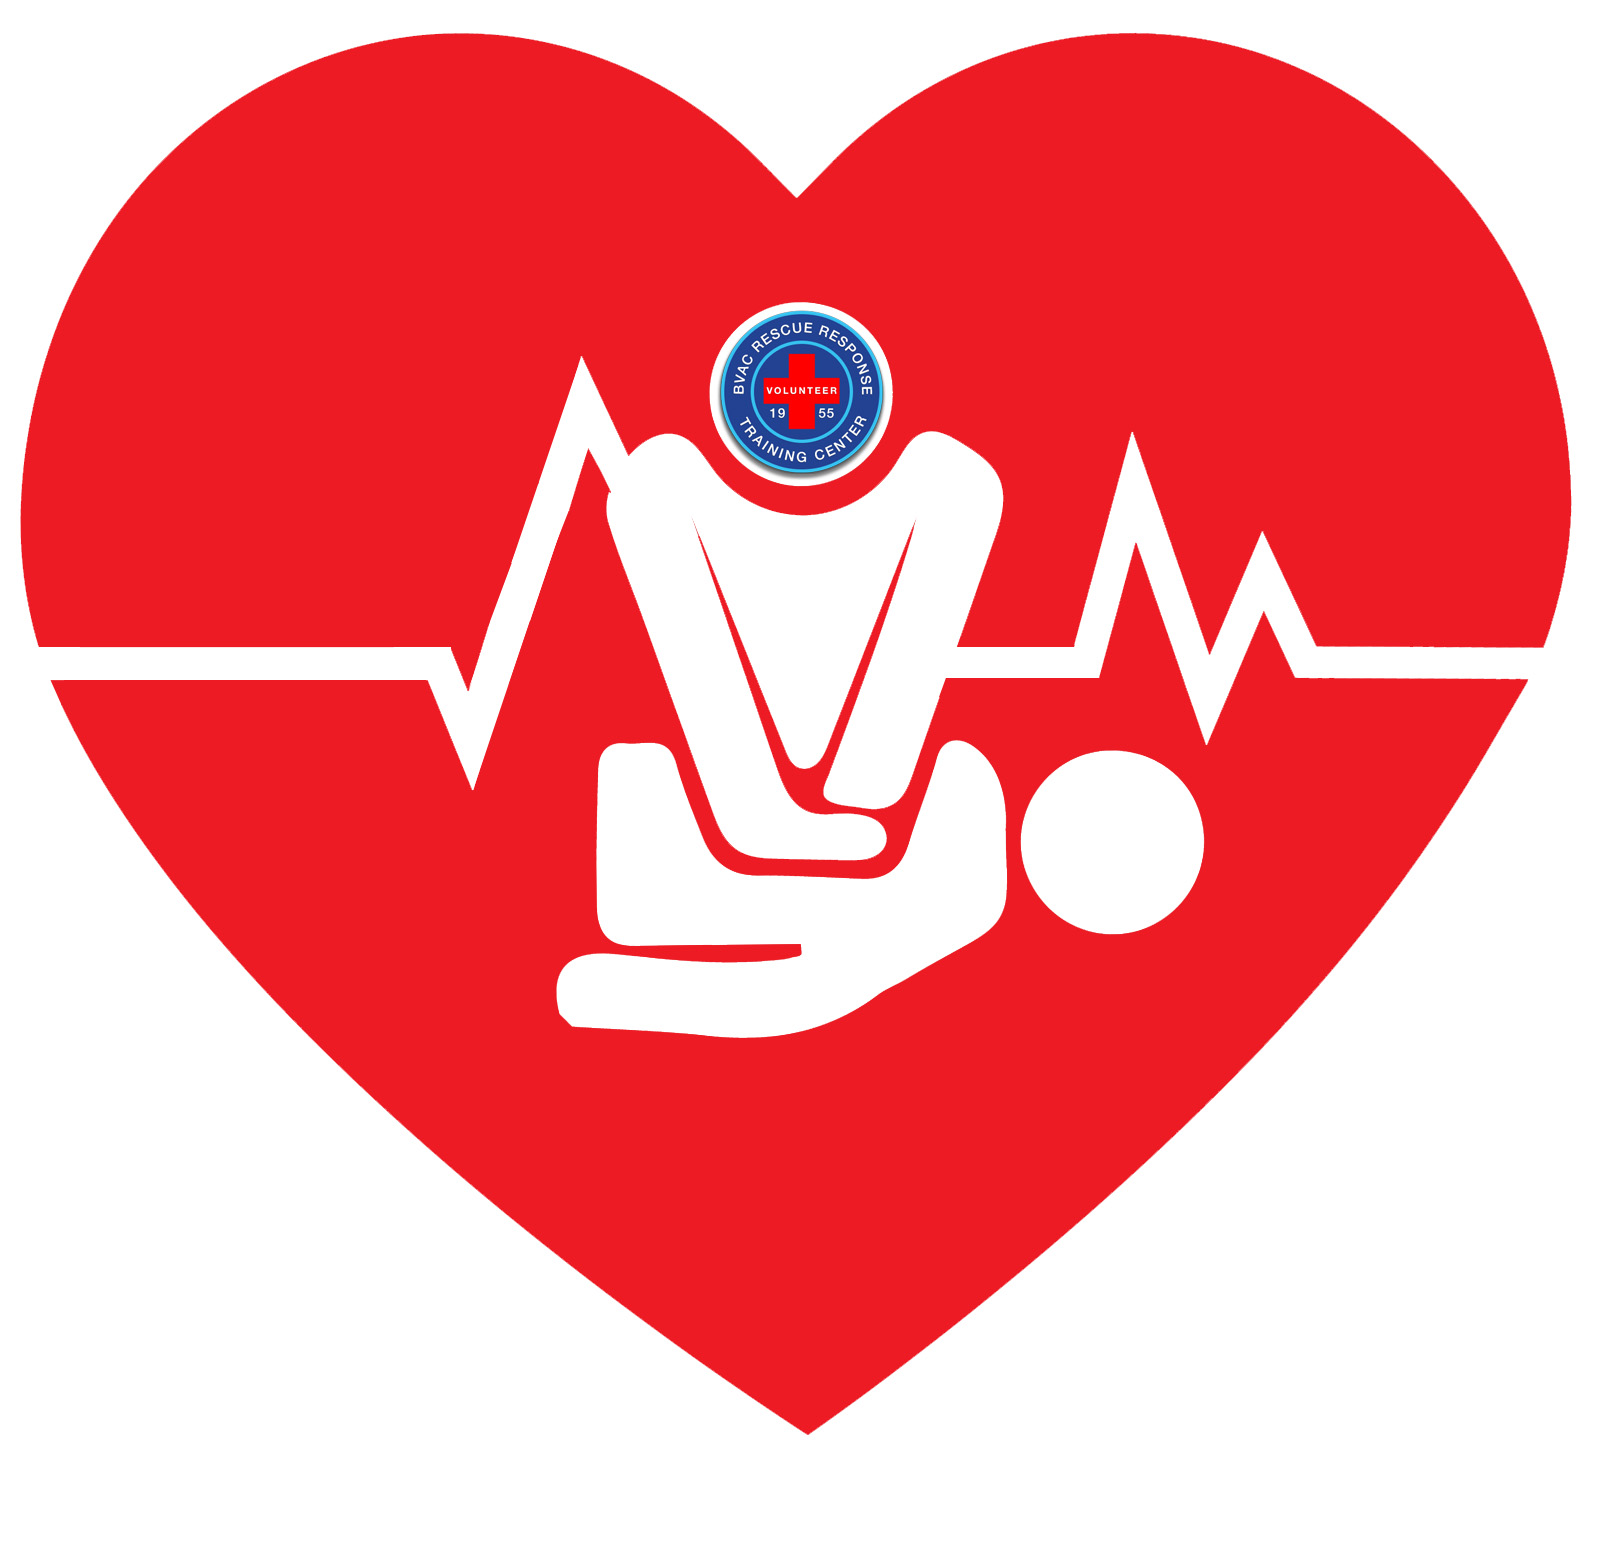 Who Should Take an AHA BLS CPR Instructor Course?